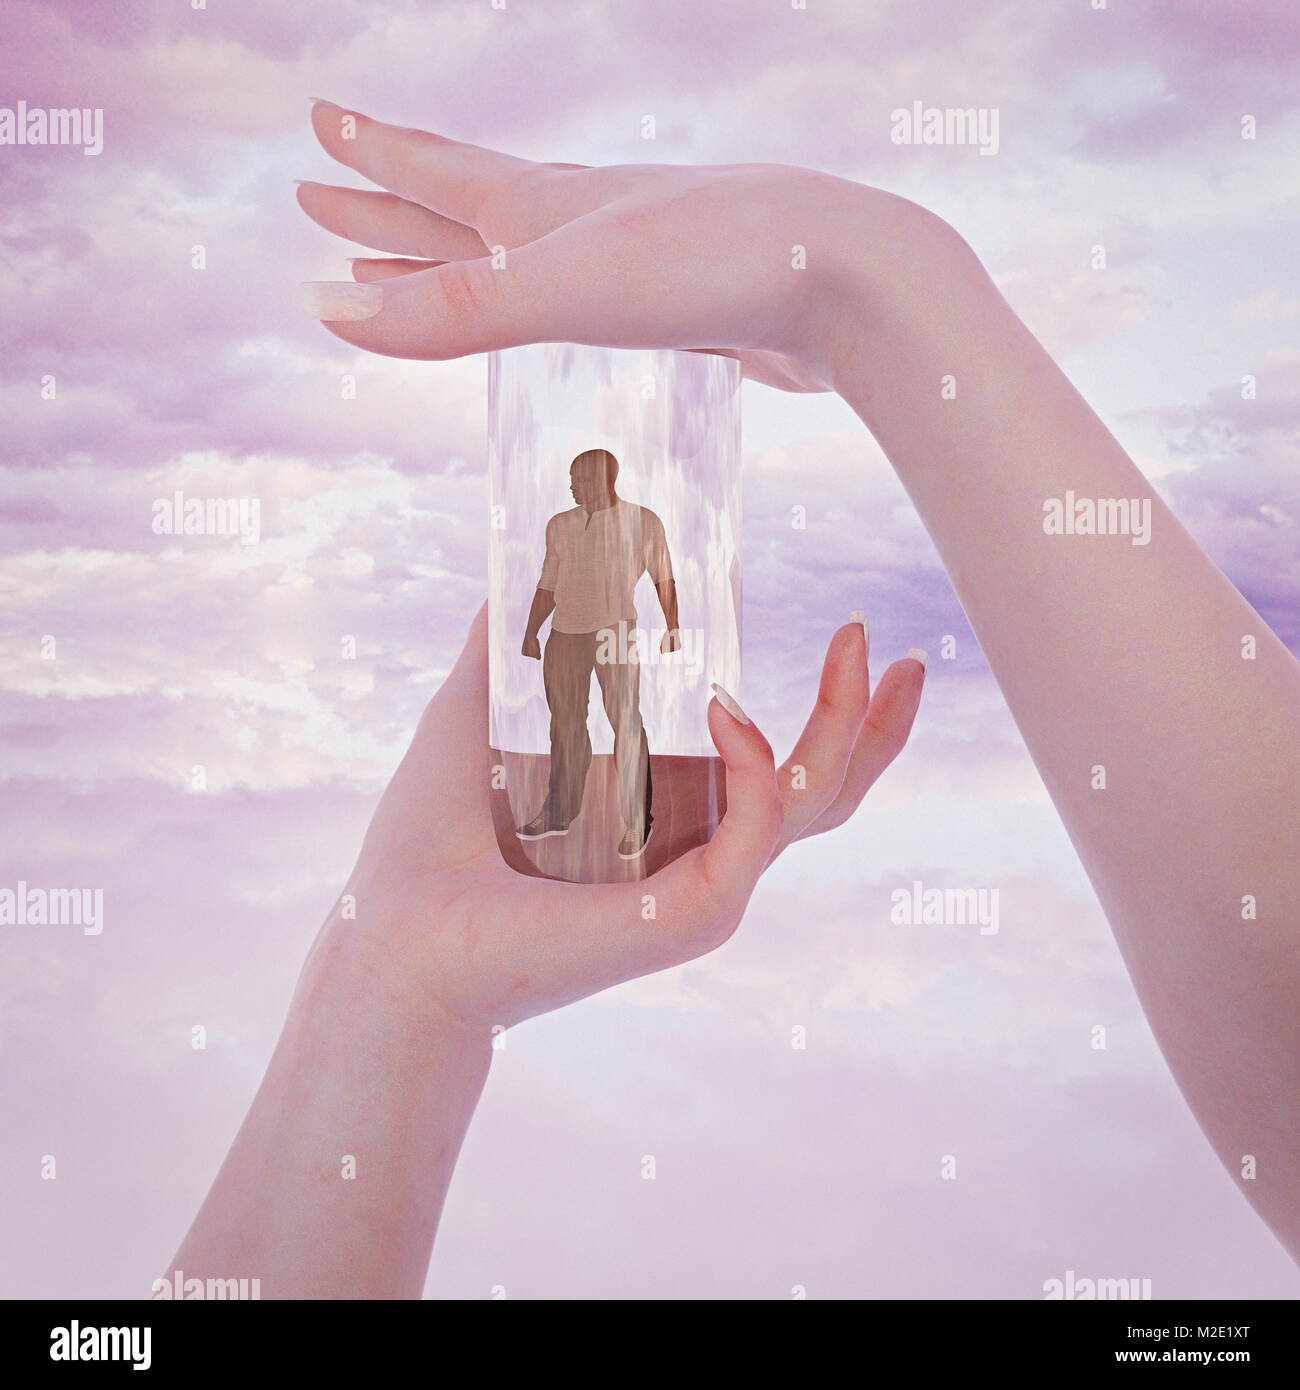 Hands of woman trapping man in glass container Stock Photo